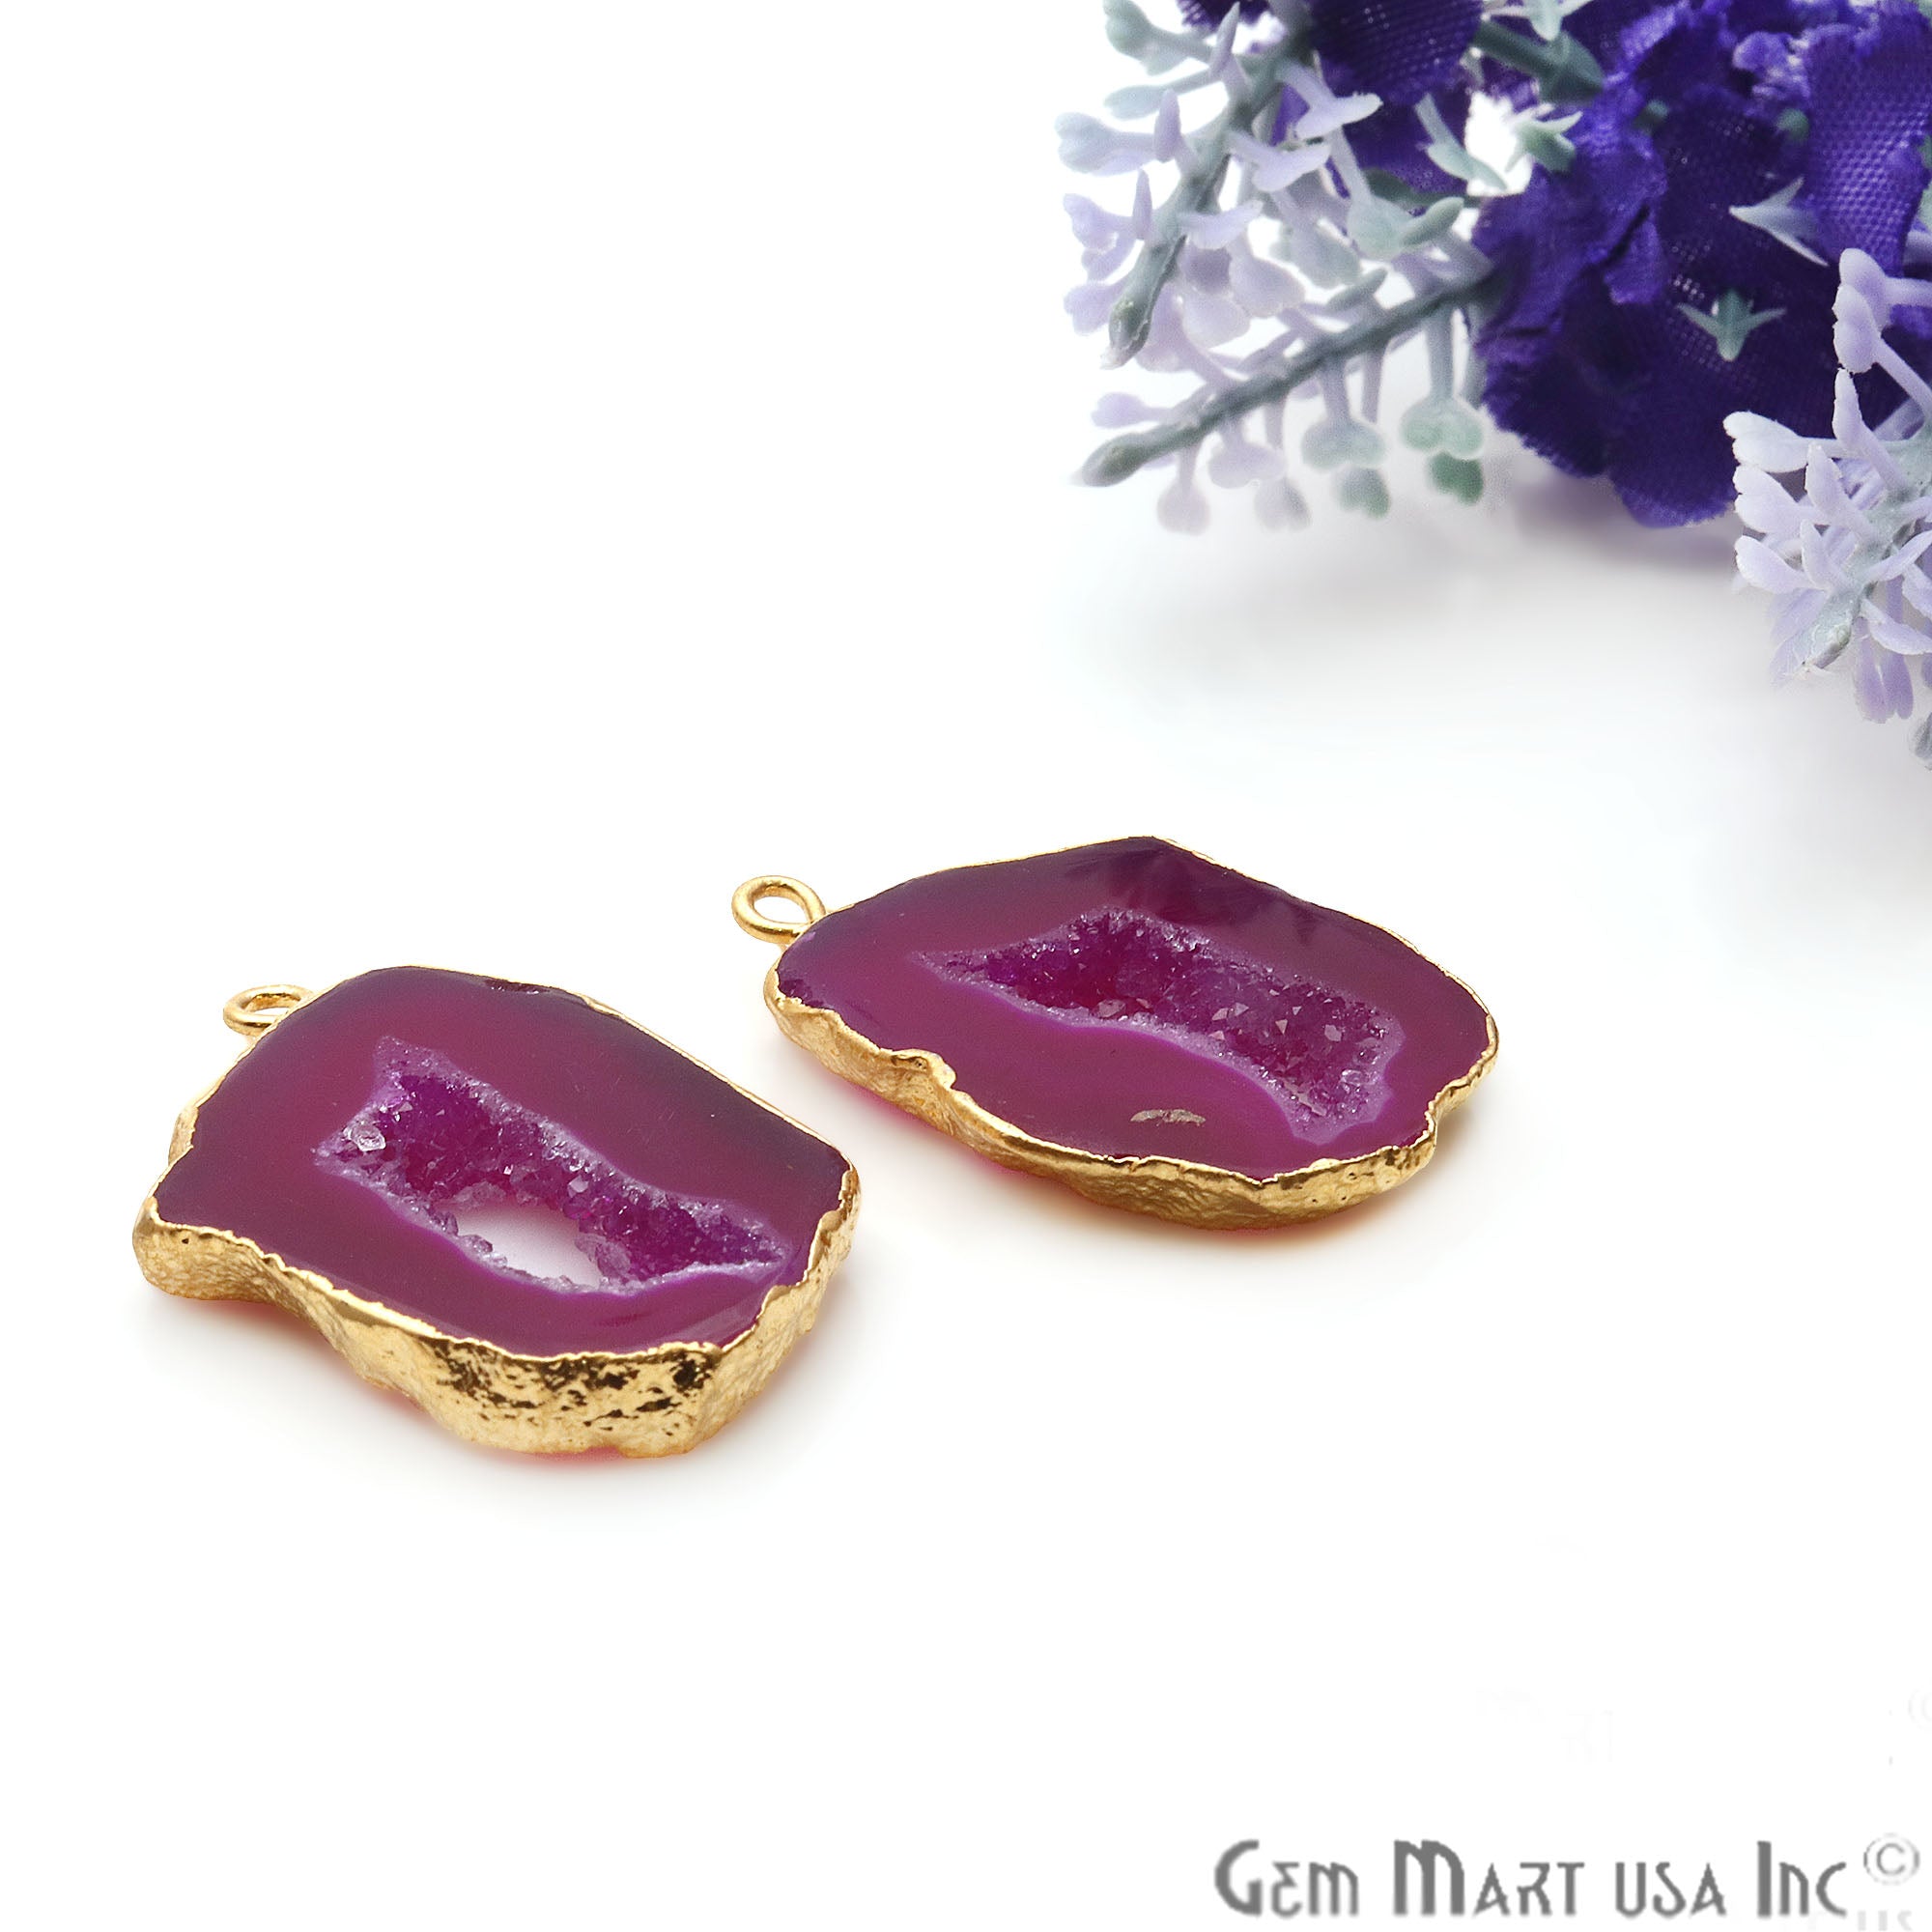 Agate Slice 30x18mm Organic Gold Electroplated Gemstone Earring Connector 1 Pair - GemMartUSA